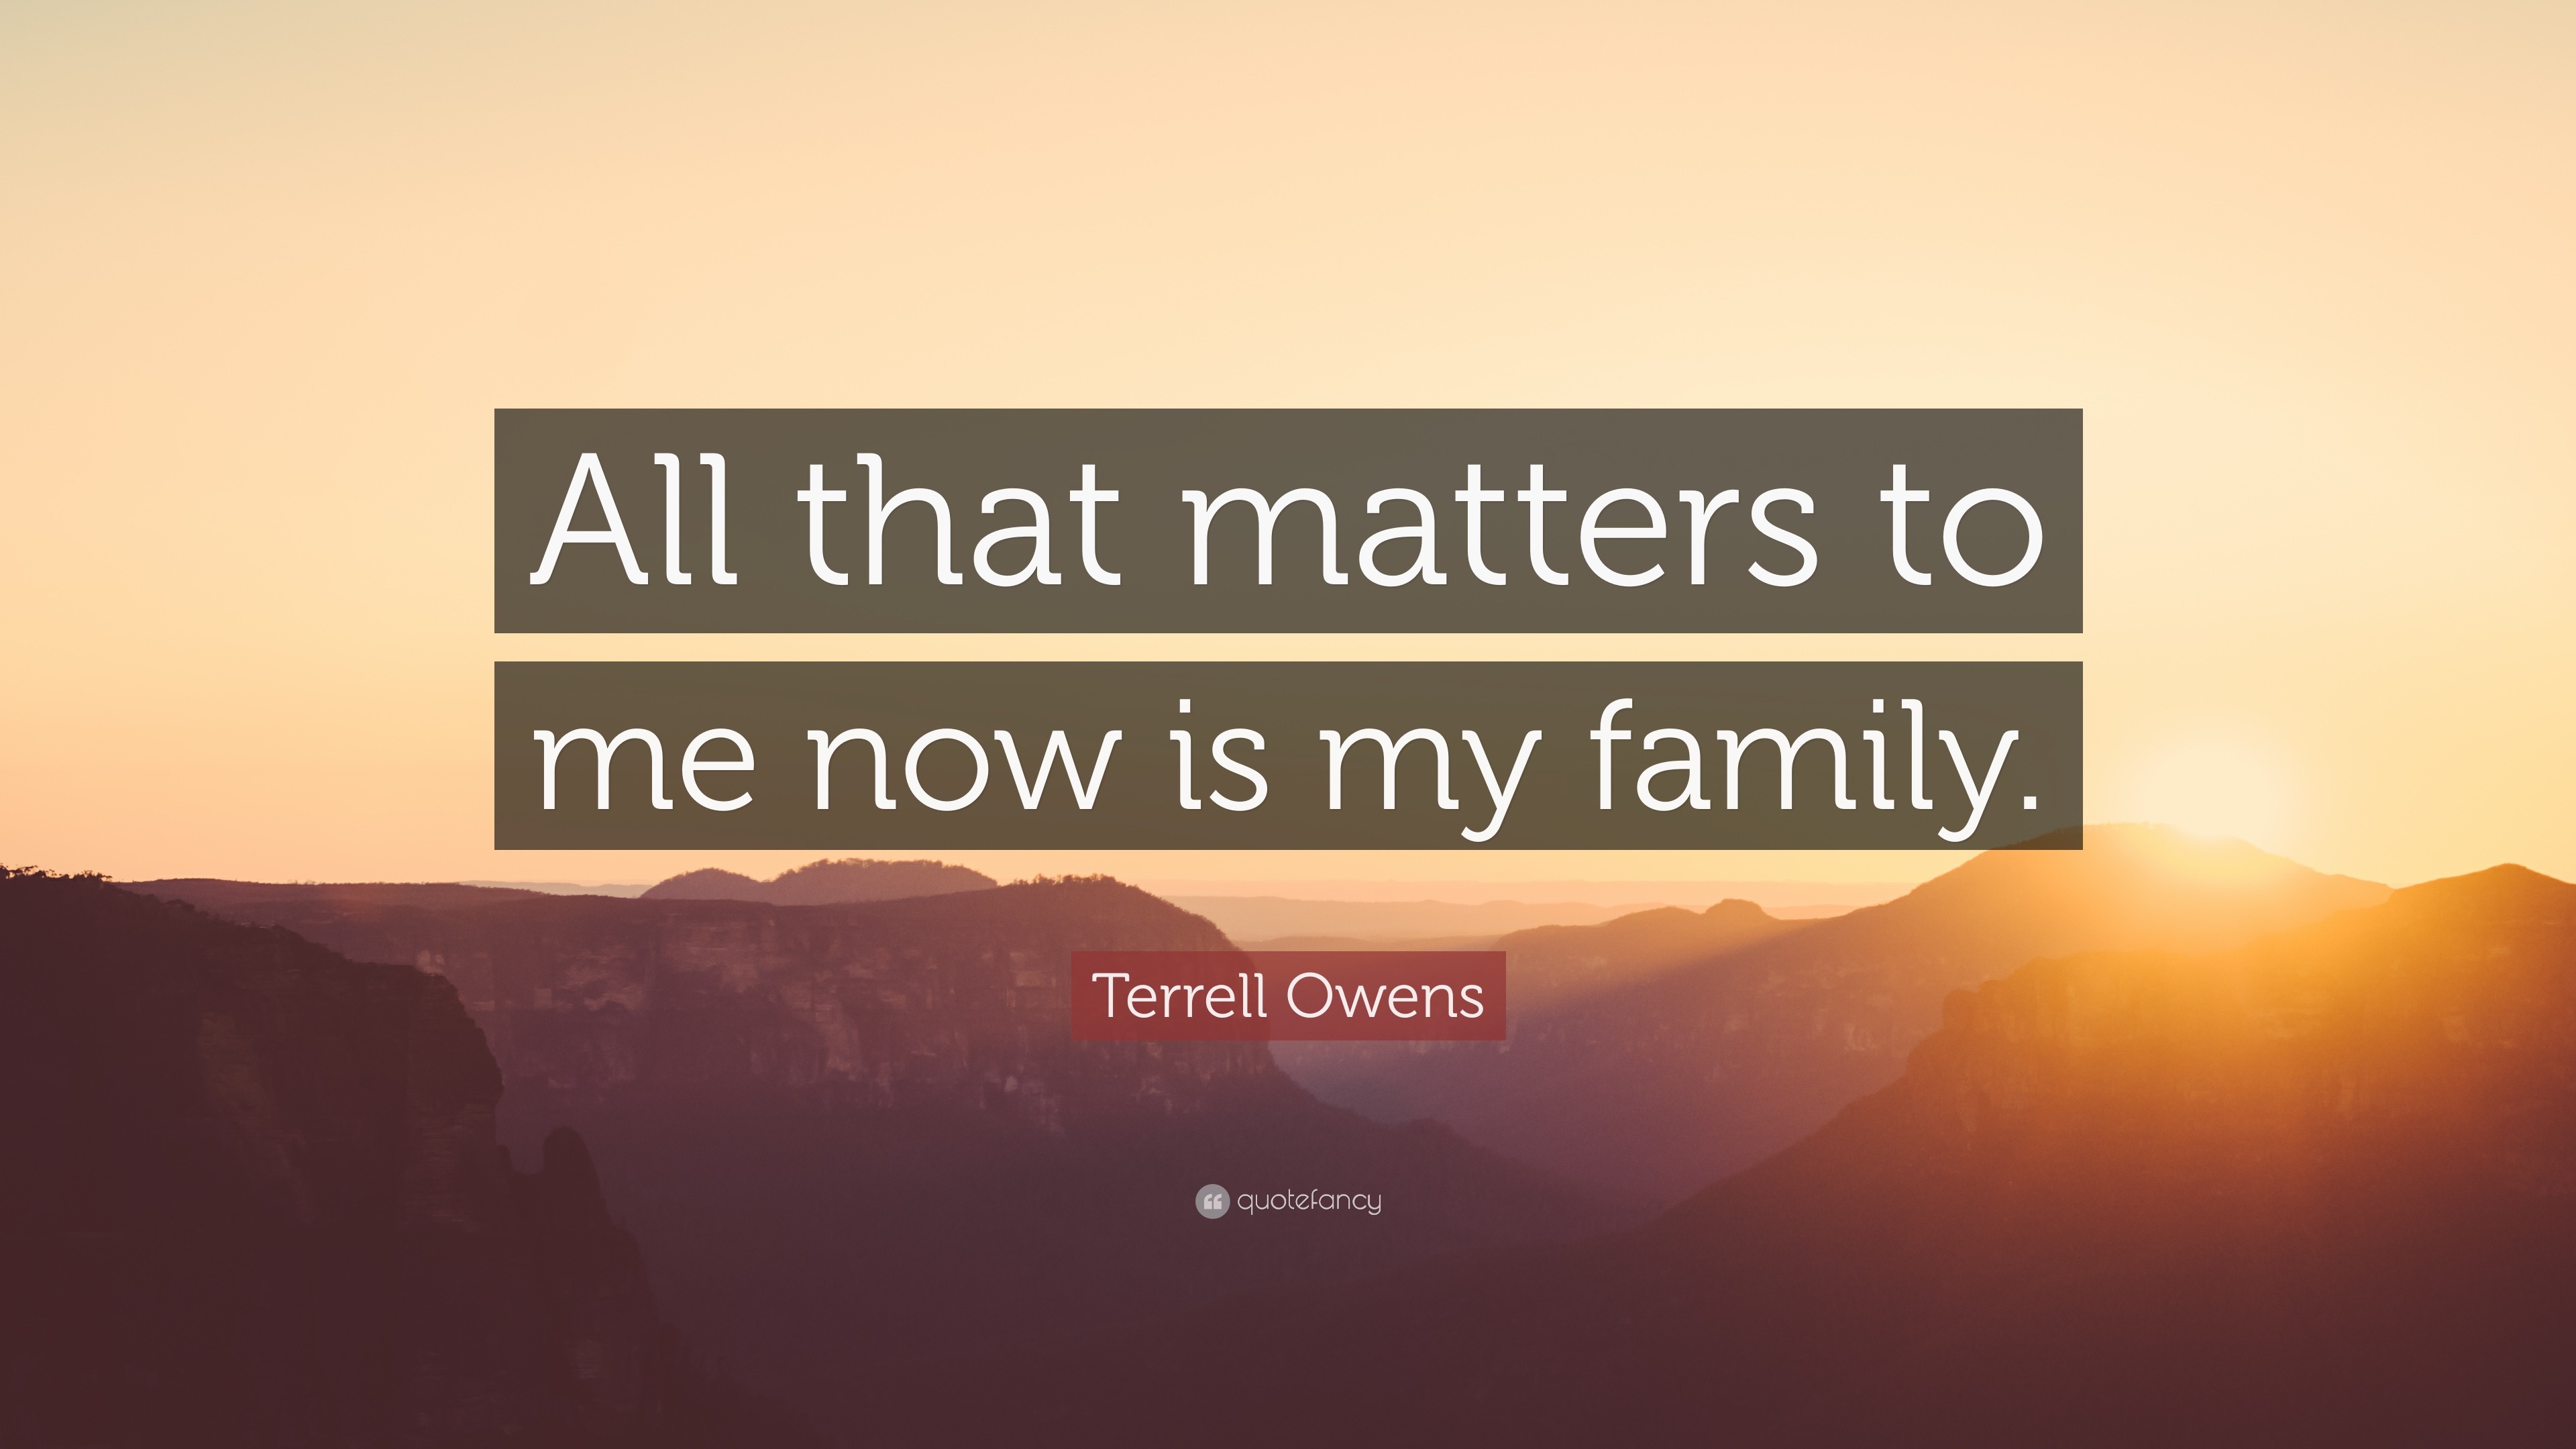 Terrell Owens Quote: “All That Matters To Me Now Is My Family.”